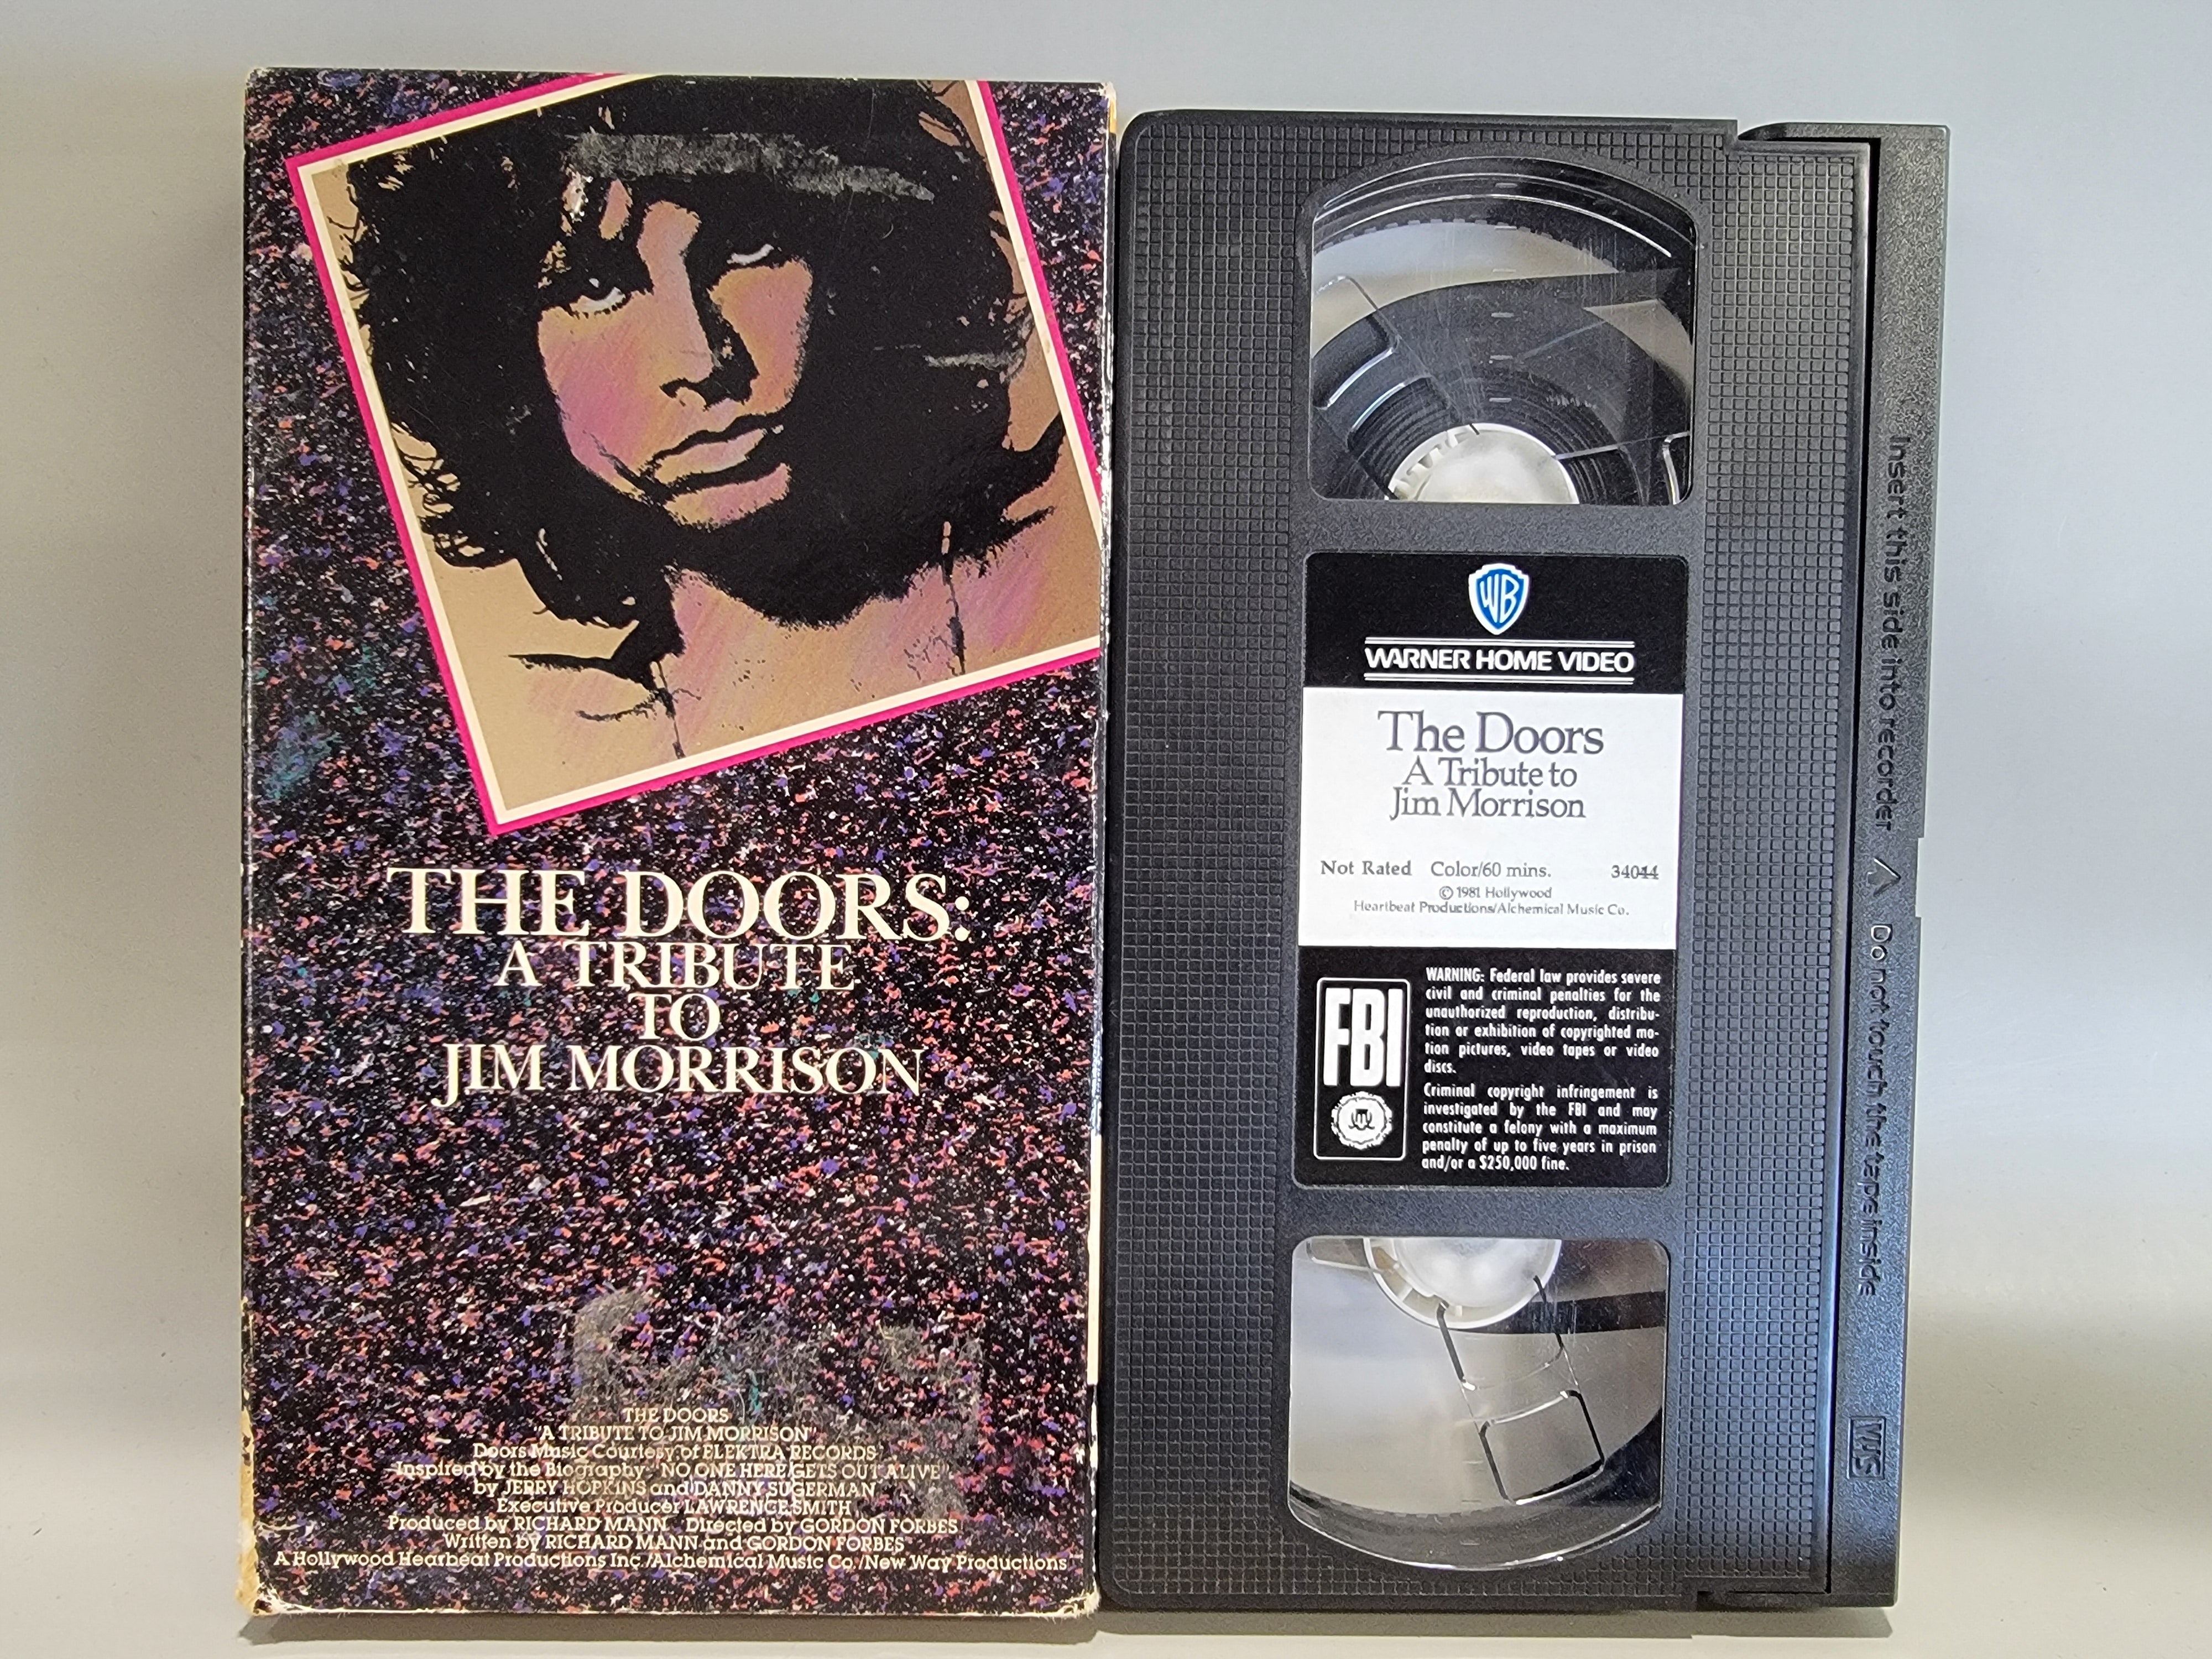 THE DOORS: A TRIBUTE TO JIM MORRISON VHS [USED]